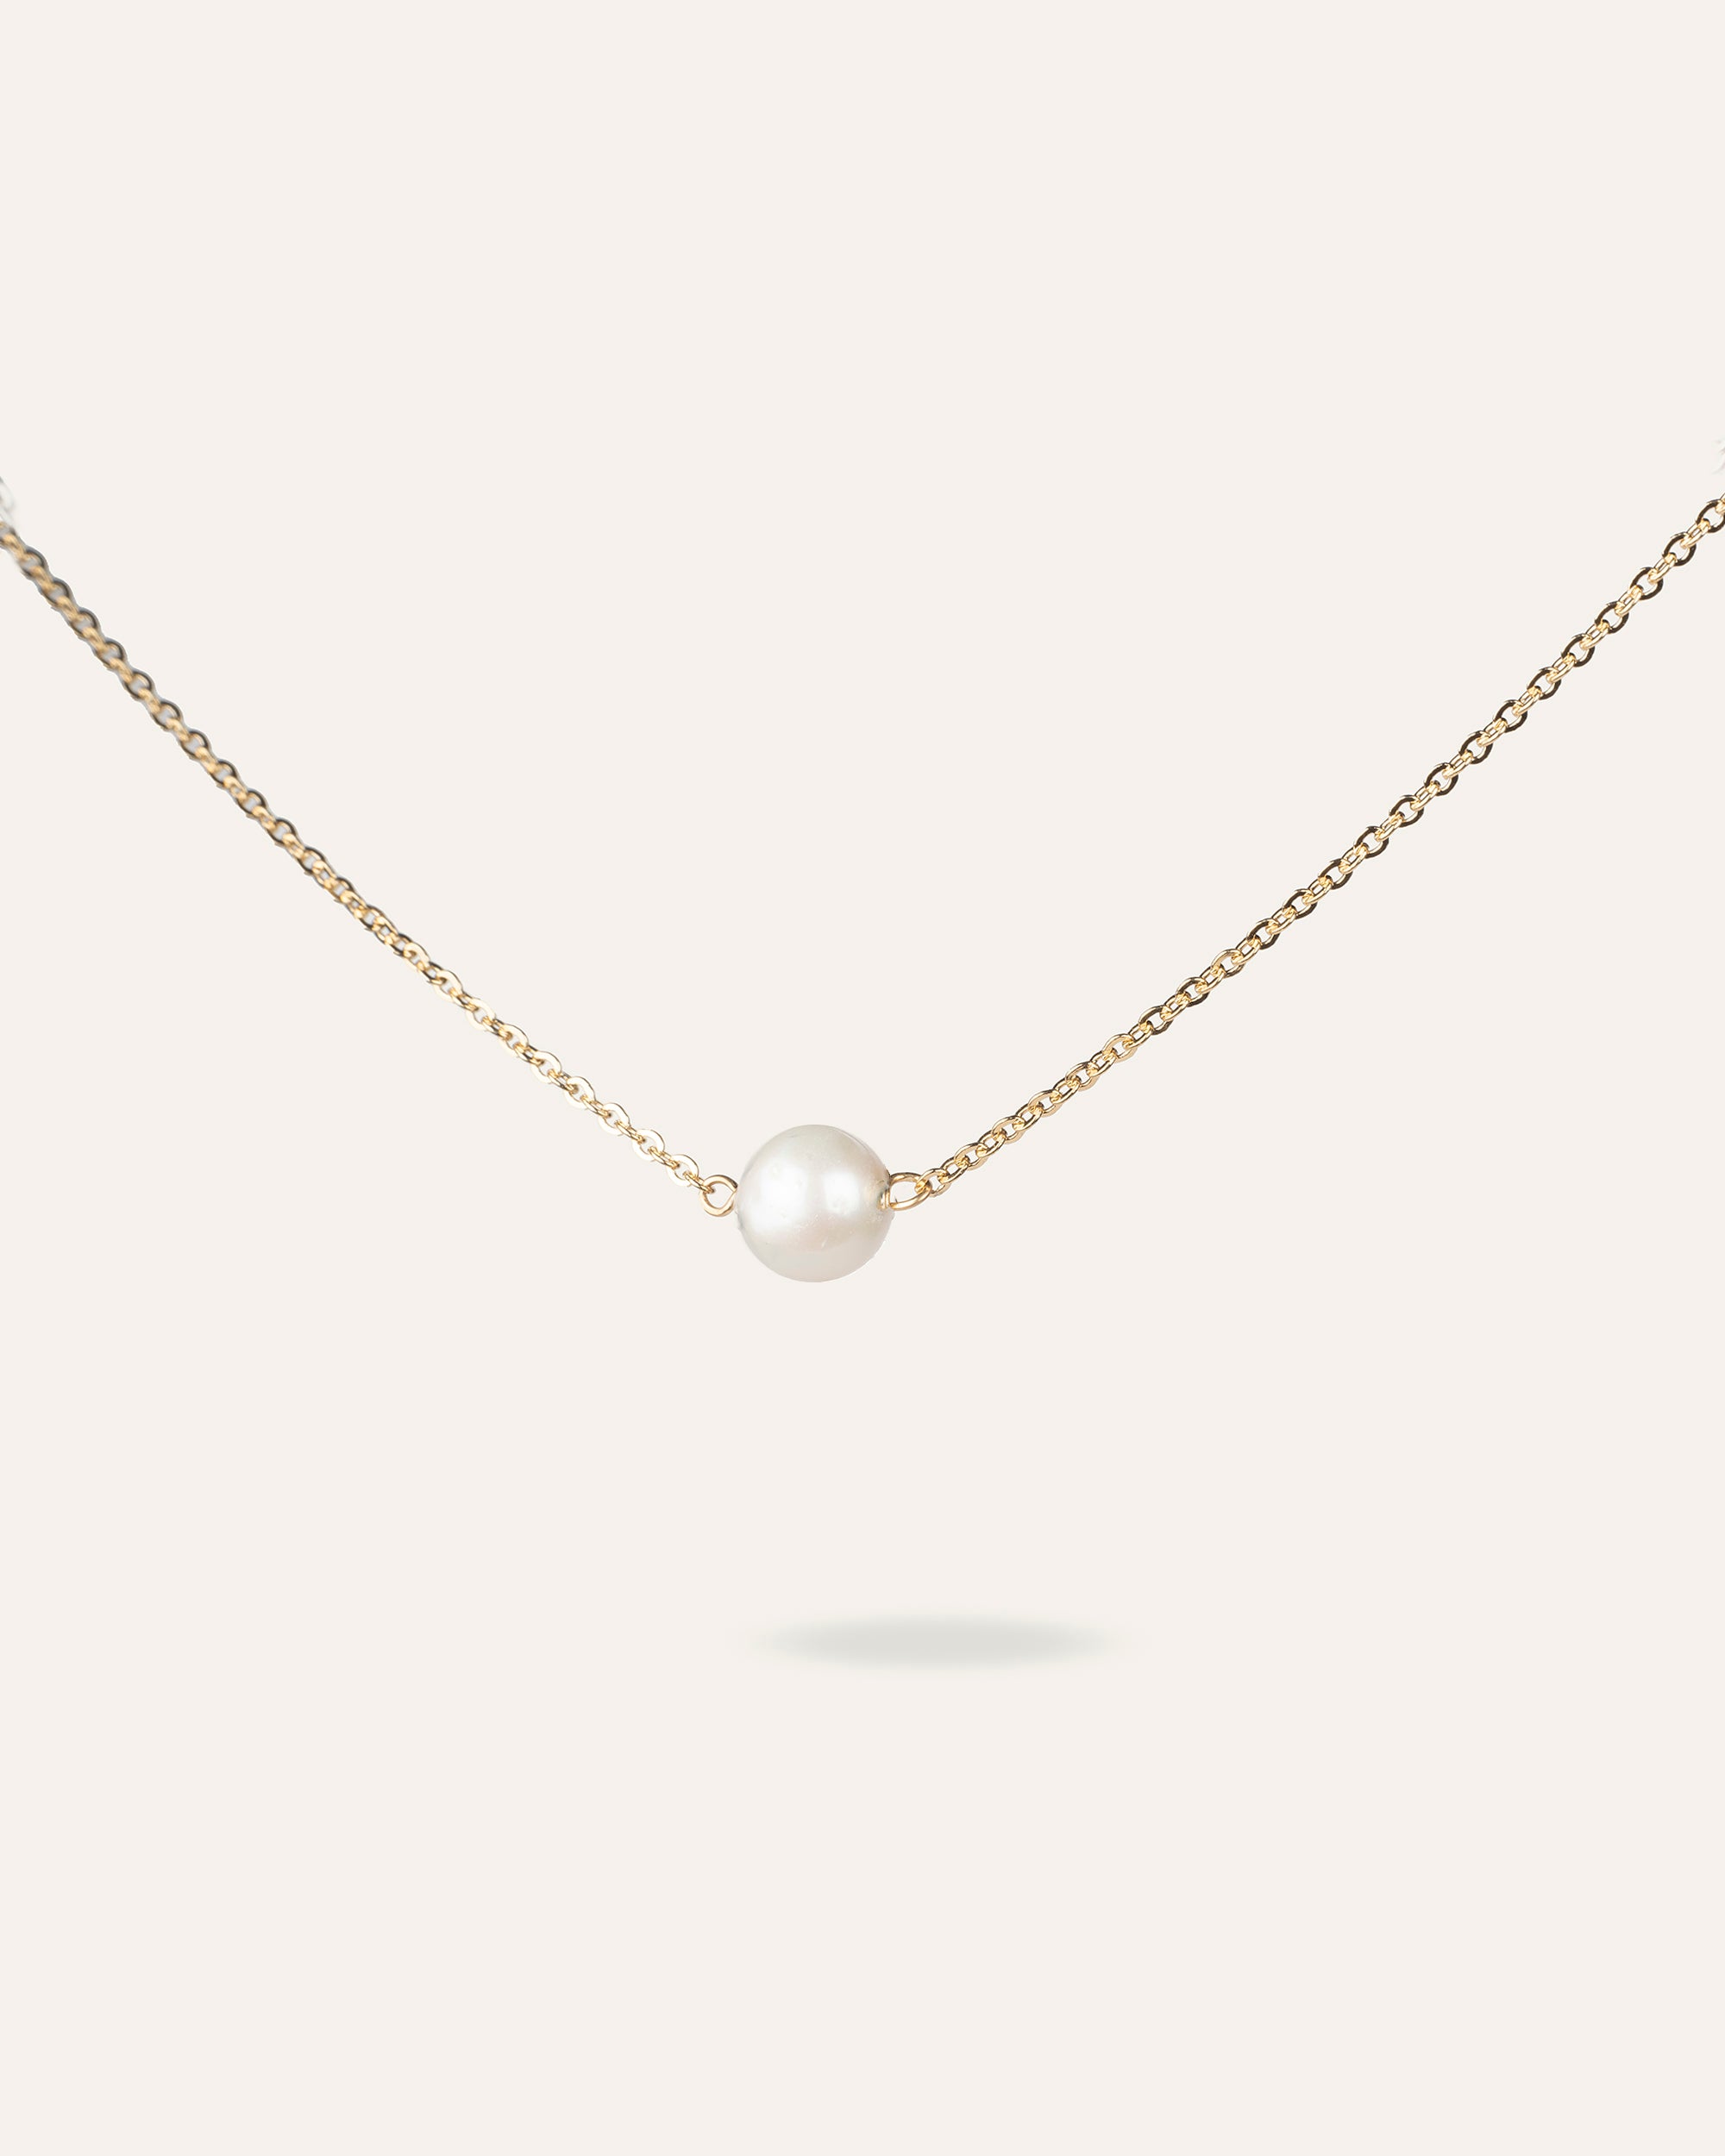 Gold and pearl Elegance necklace